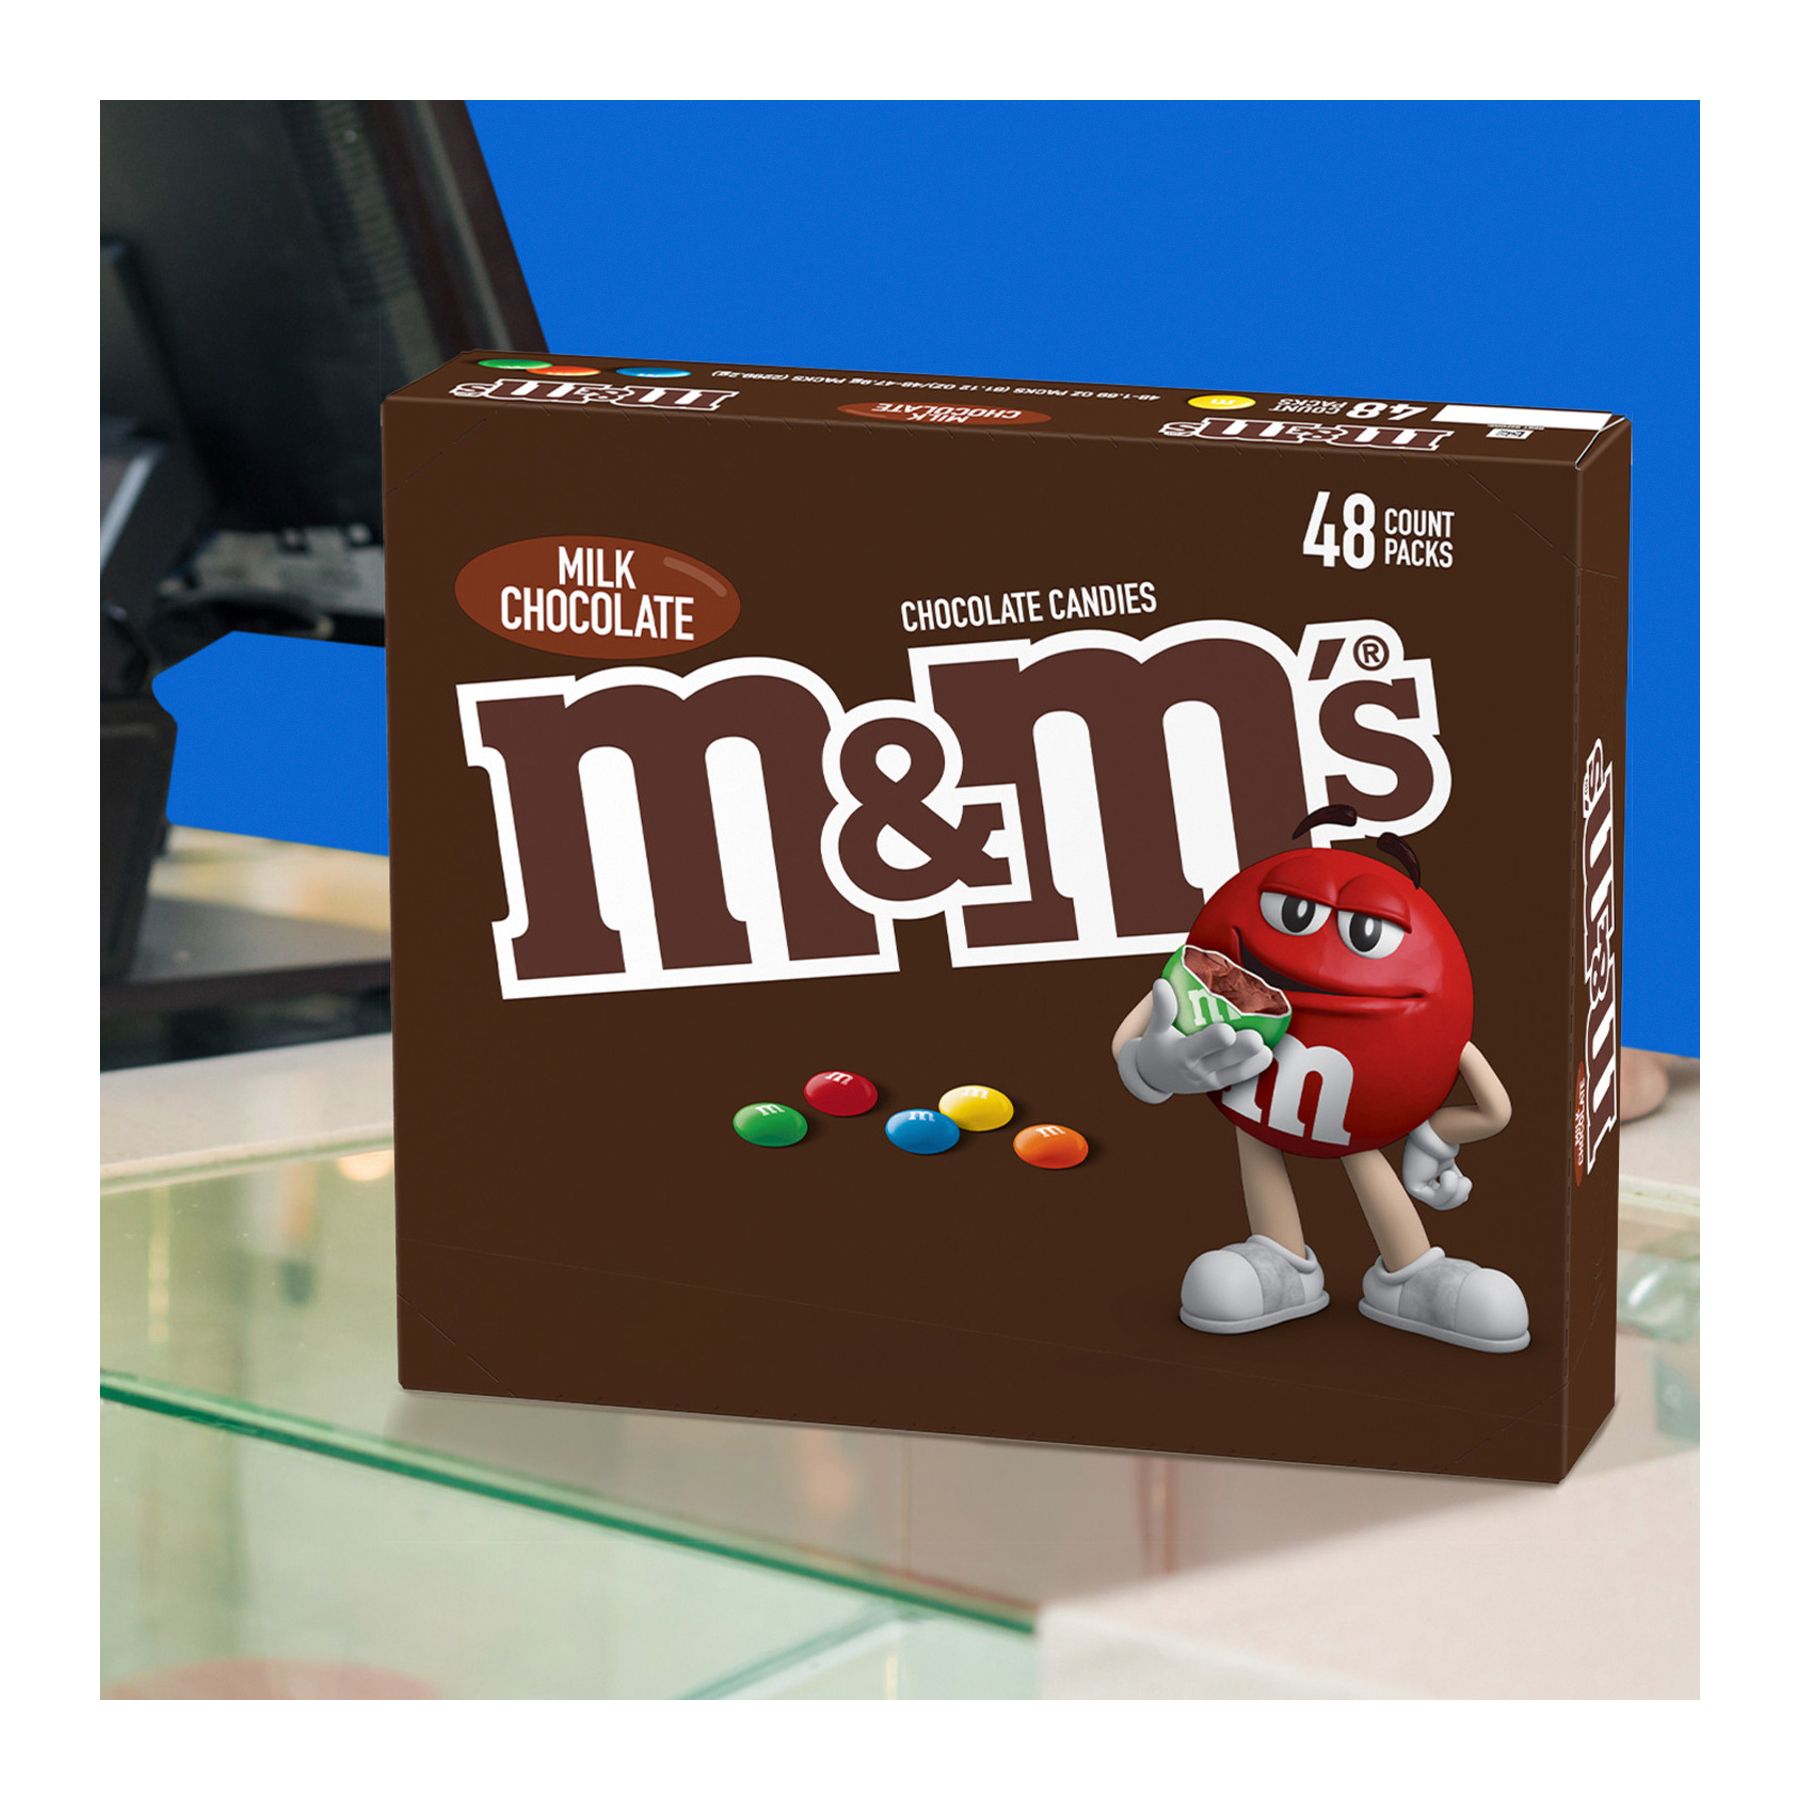  M&M'S Full Size Peanut Milk Chocolate Candy Bulk Pack, 1.74  oz, 48 ct Box : Chocolate Candy : Grocery & Gourmet Food